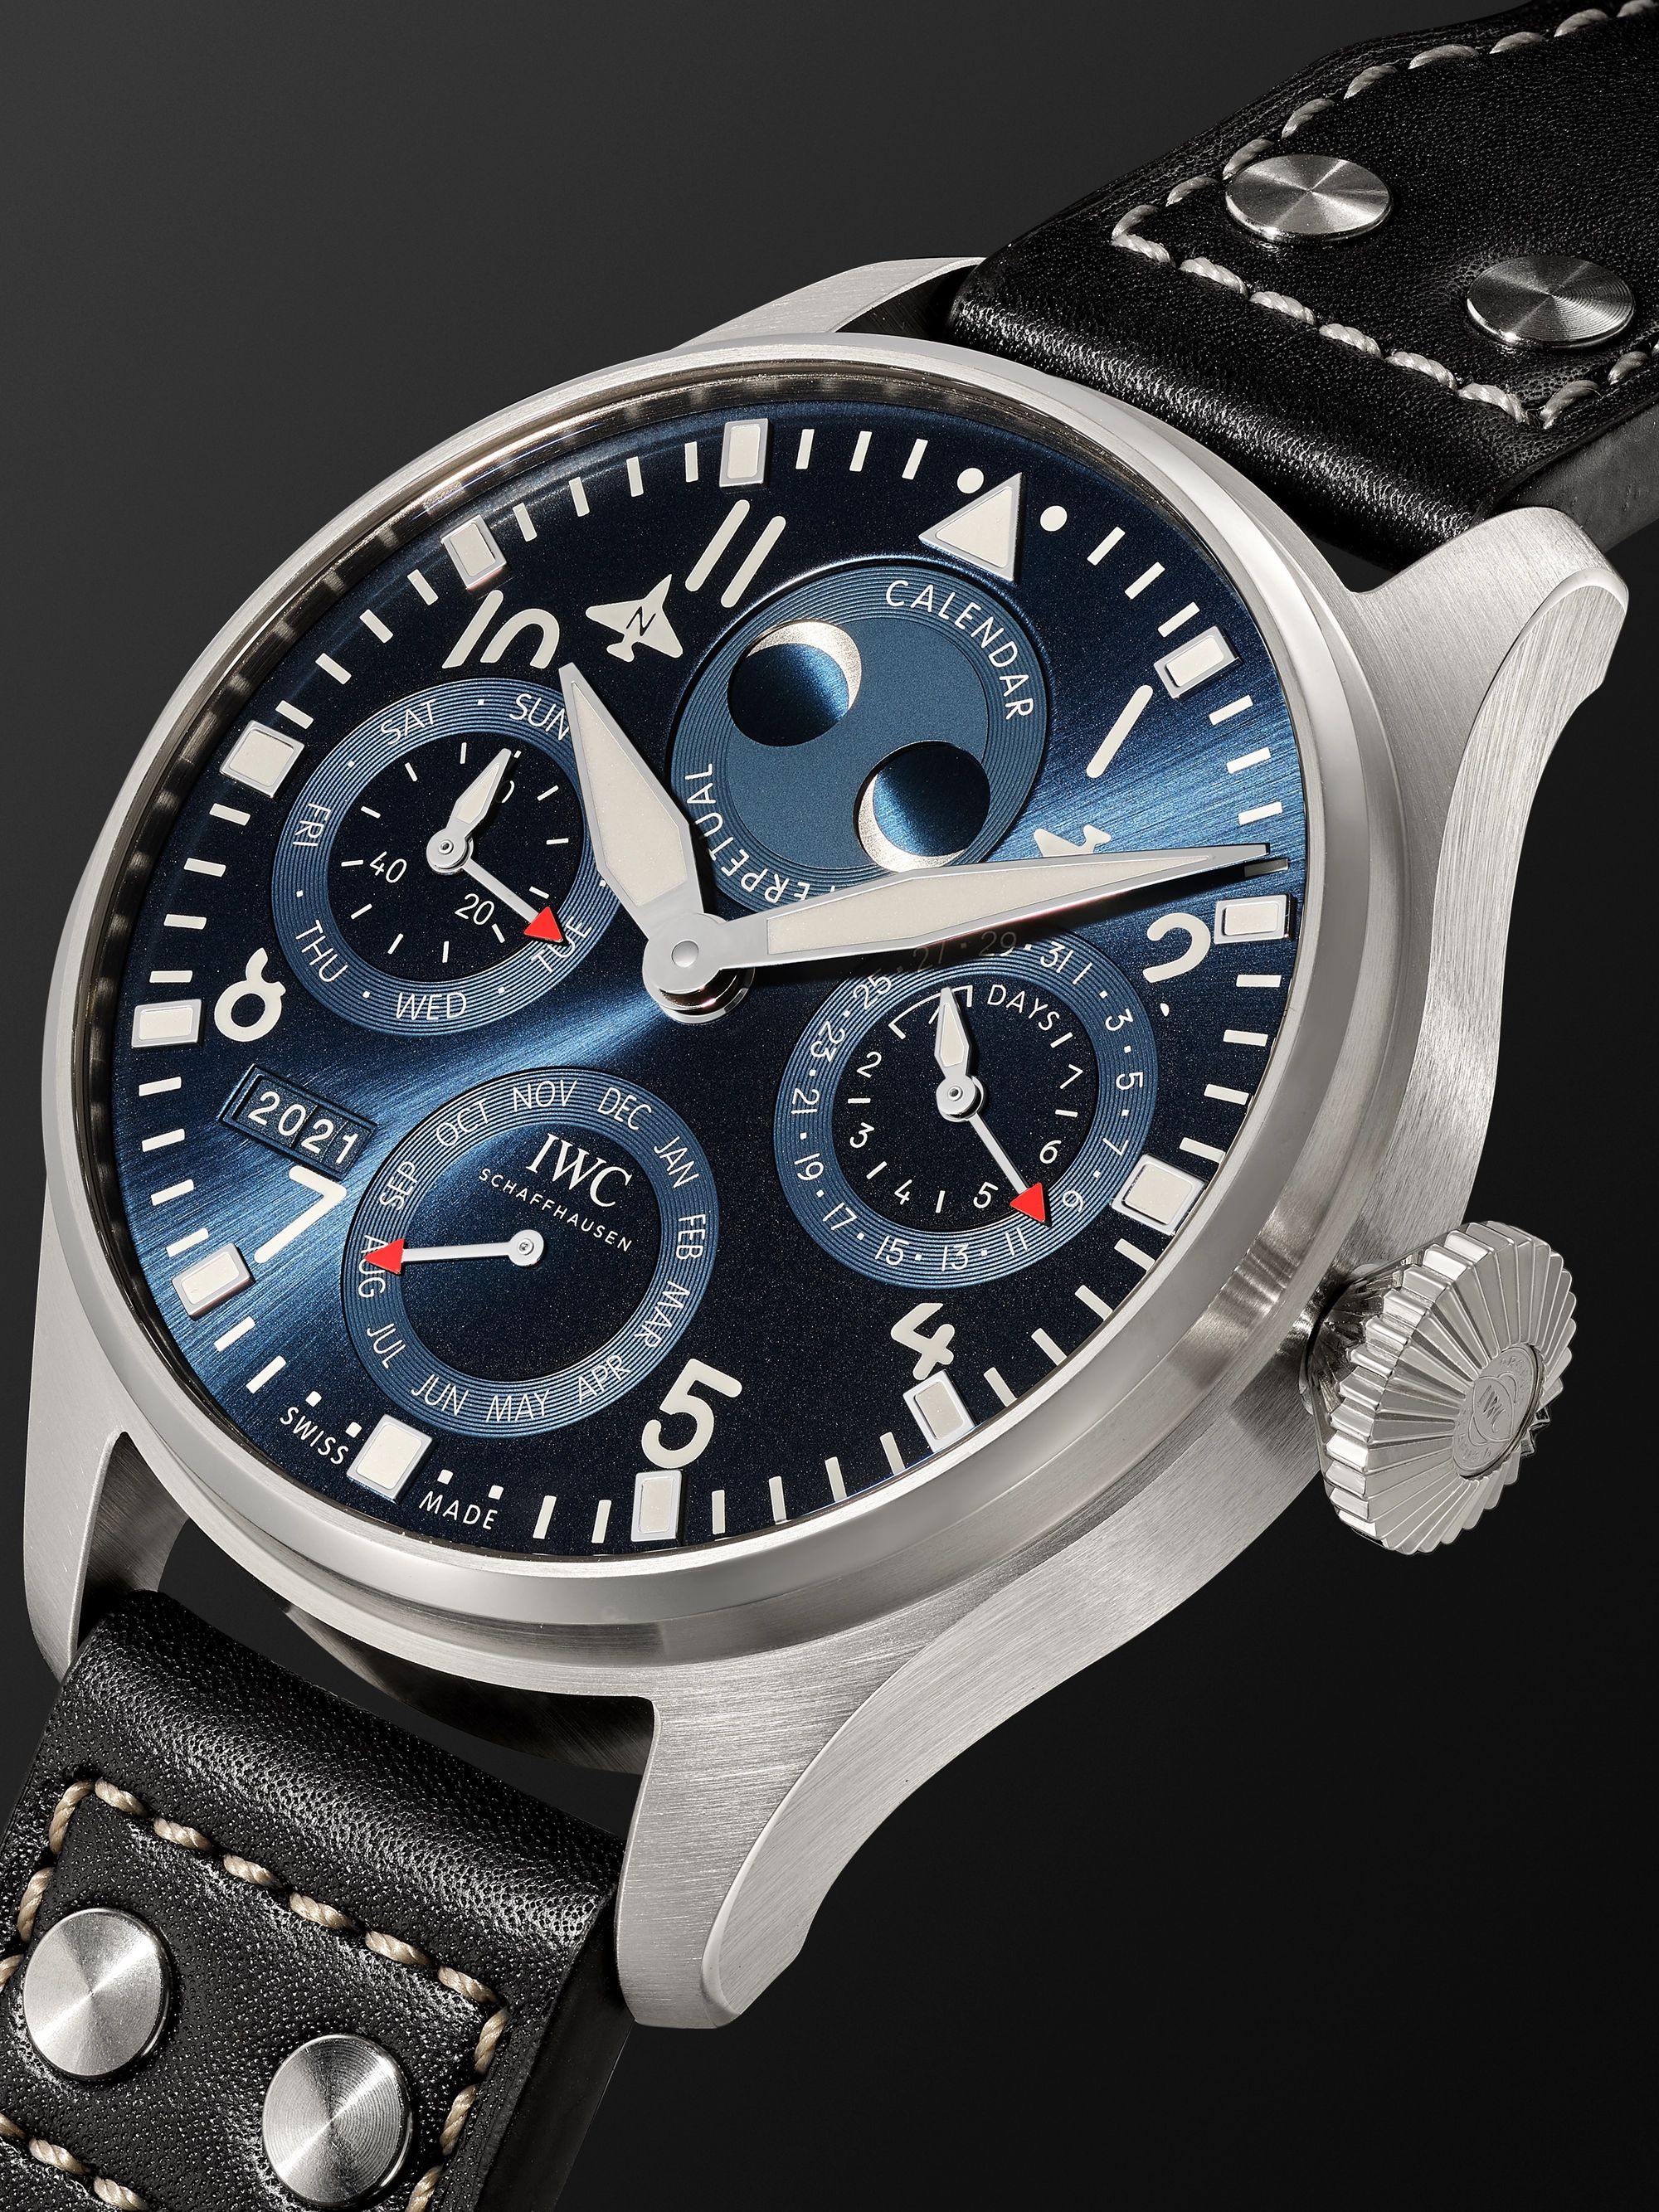 IWC SCHAFFHAUSEN Big Pilot's Automatic Perpetual Calendar 46.2mm Stainless Steel and Leather Watch, Ref. No. IW503605